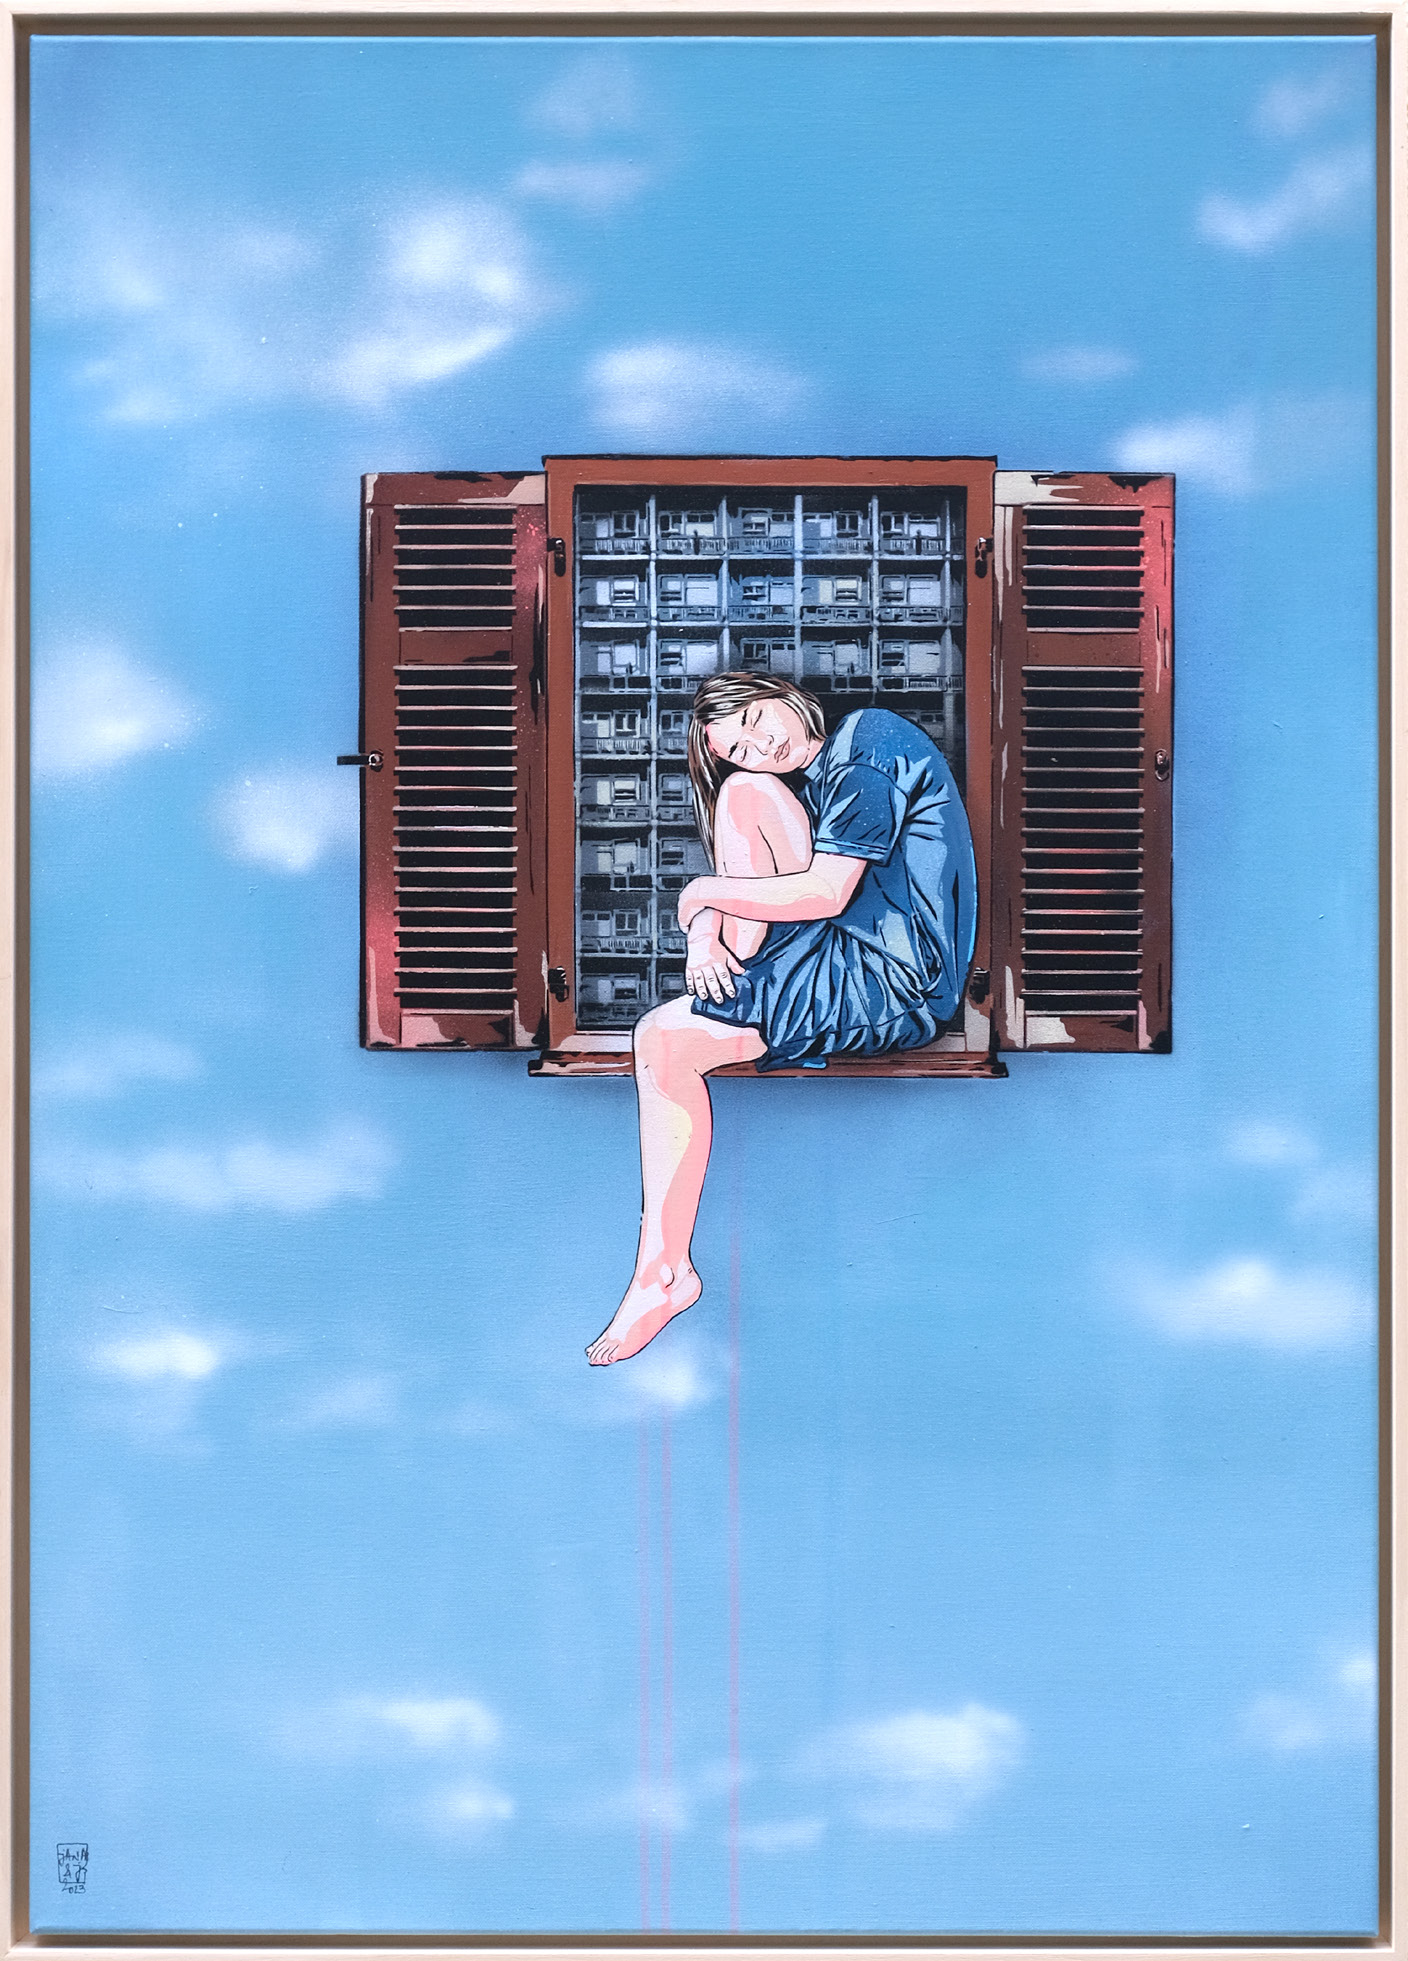 Jana & Js, In The Clouds. Copyright Galerie Dumas